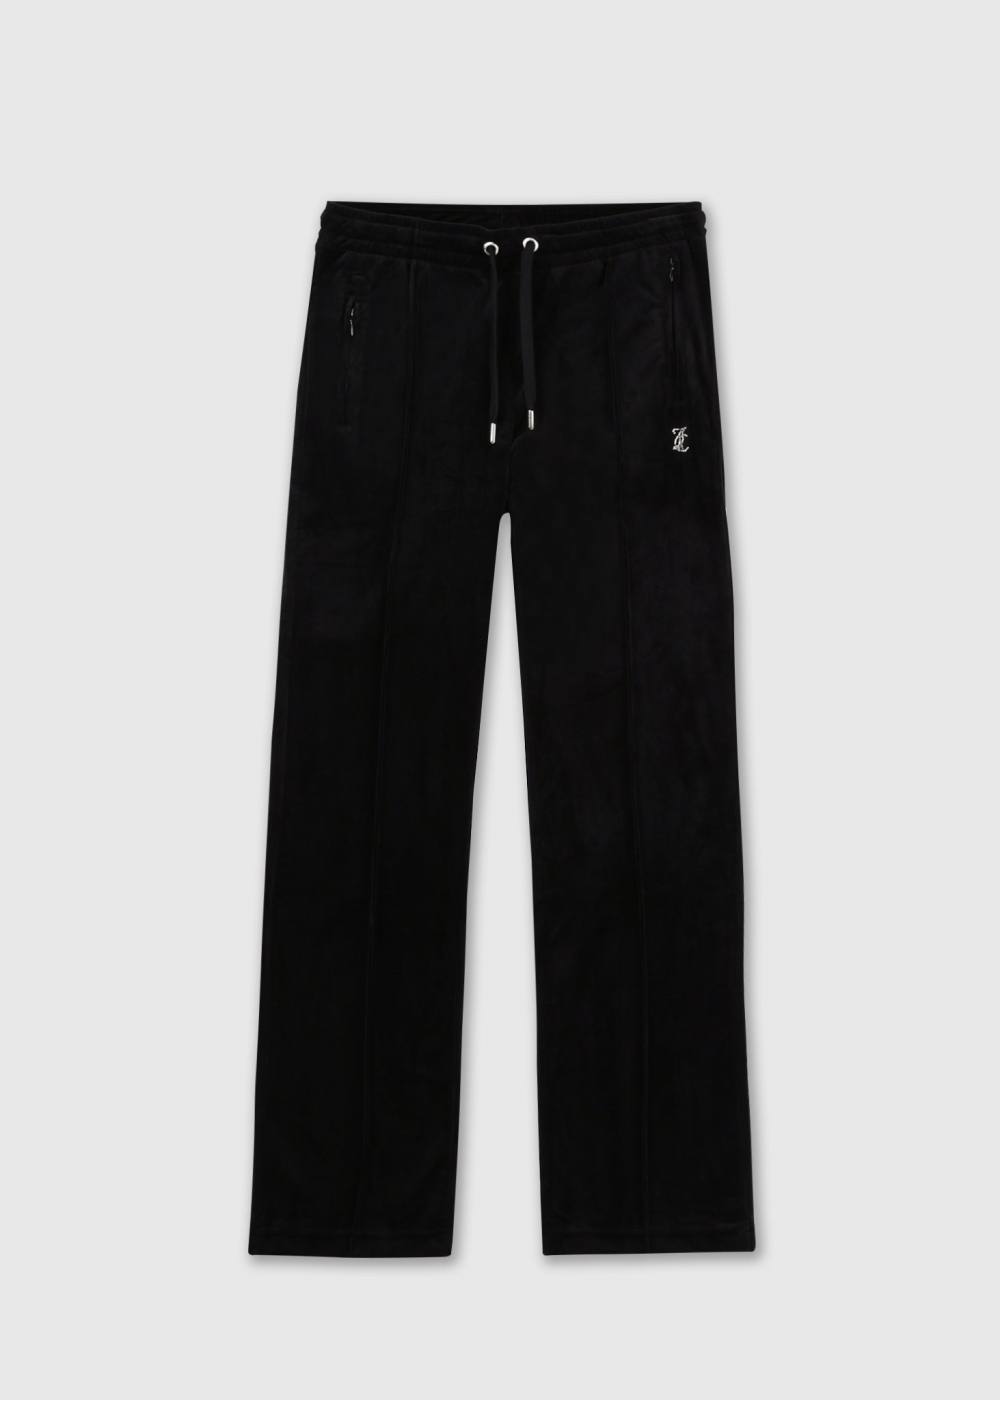 Juicy Couture Womens Tina Track Pants In Black